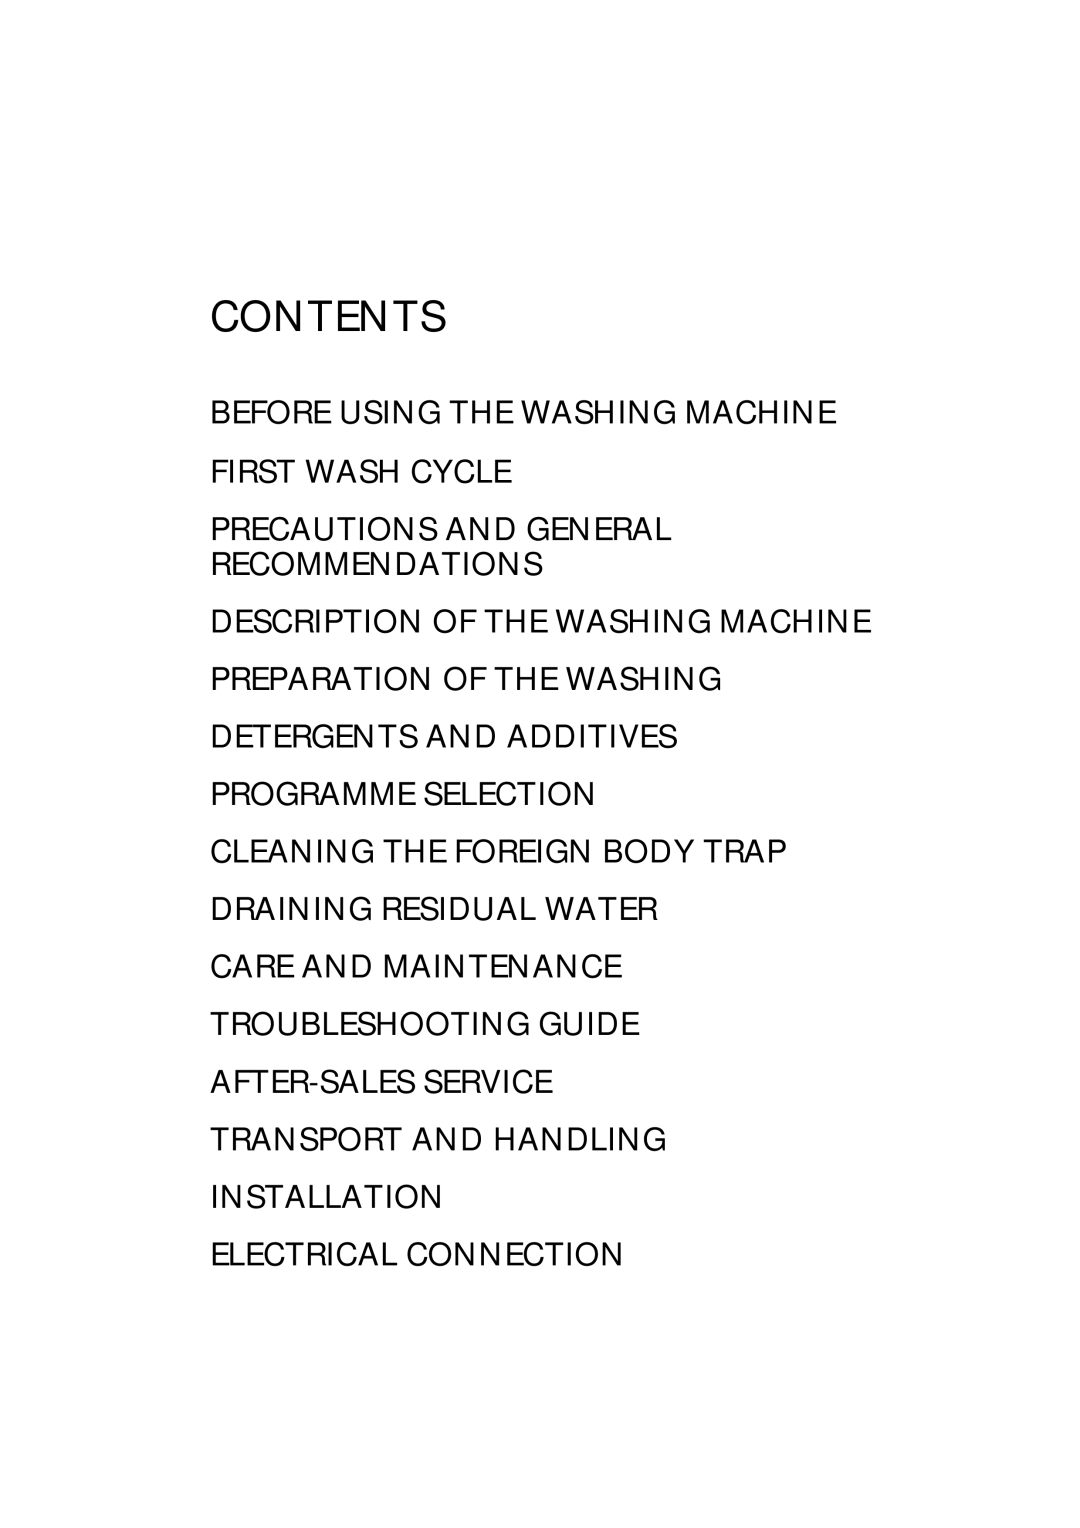 Smeg GB ST L80 manual Before Using The Washing Machine First Wash Cycle, Precautions And General Recommendations, Contents 